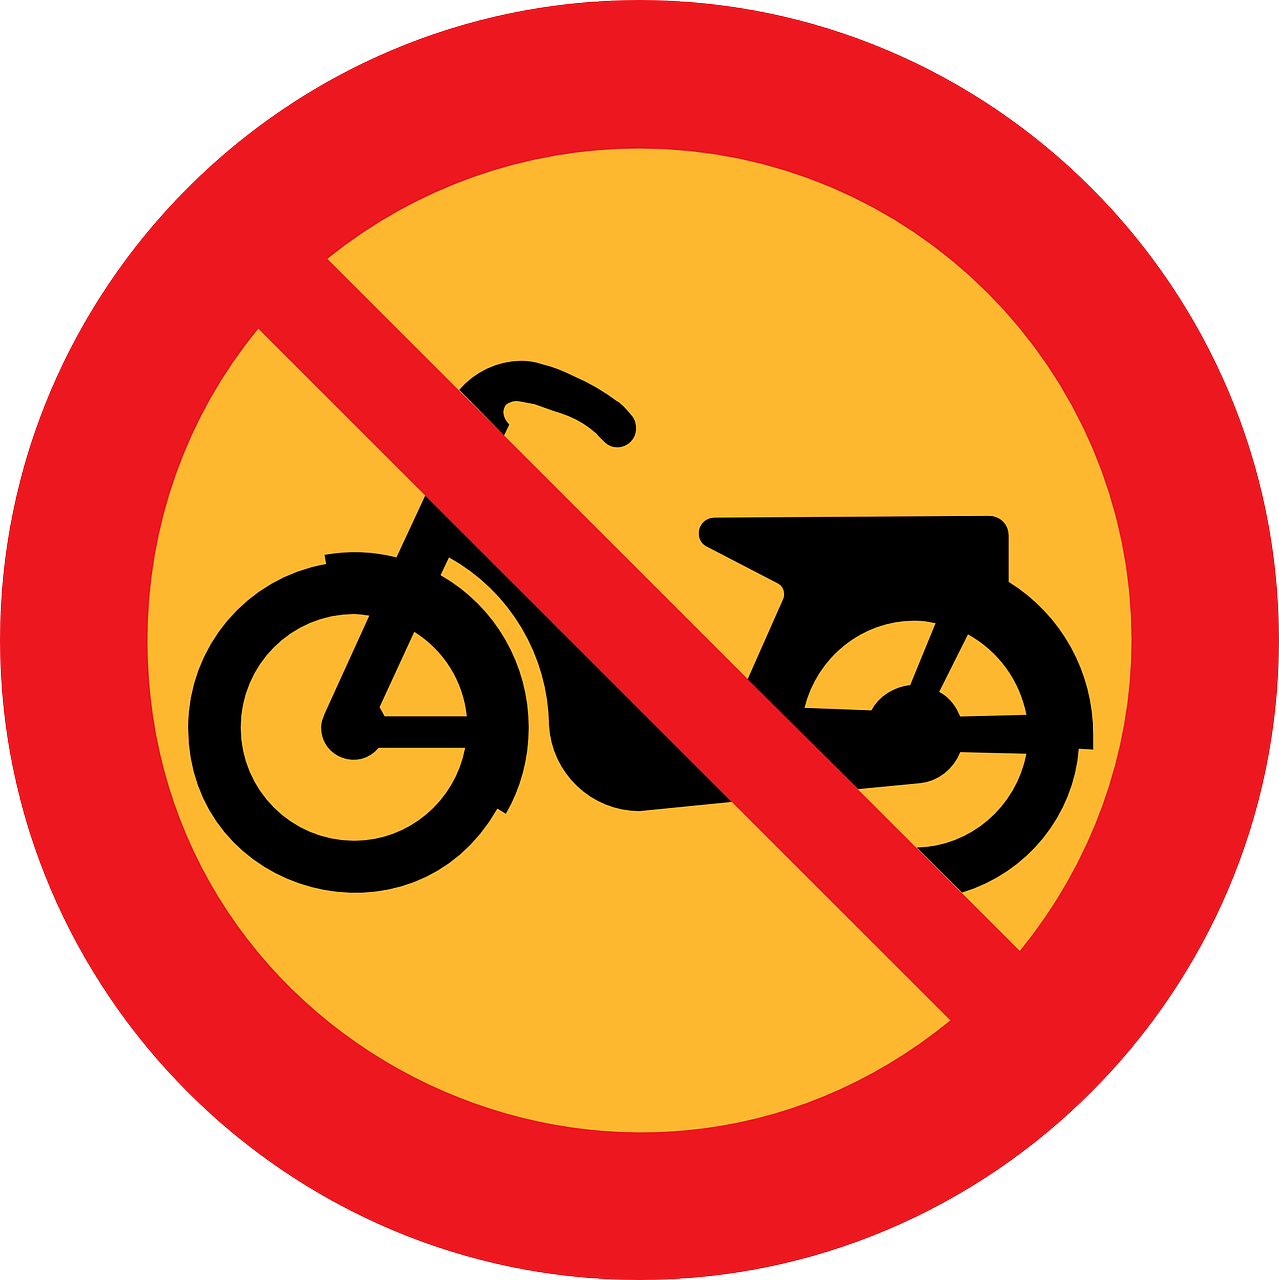 a no motorcycle sign on a white background, pixabay, modernism, flat - color, bangkok, red yellow, no - text no - logo